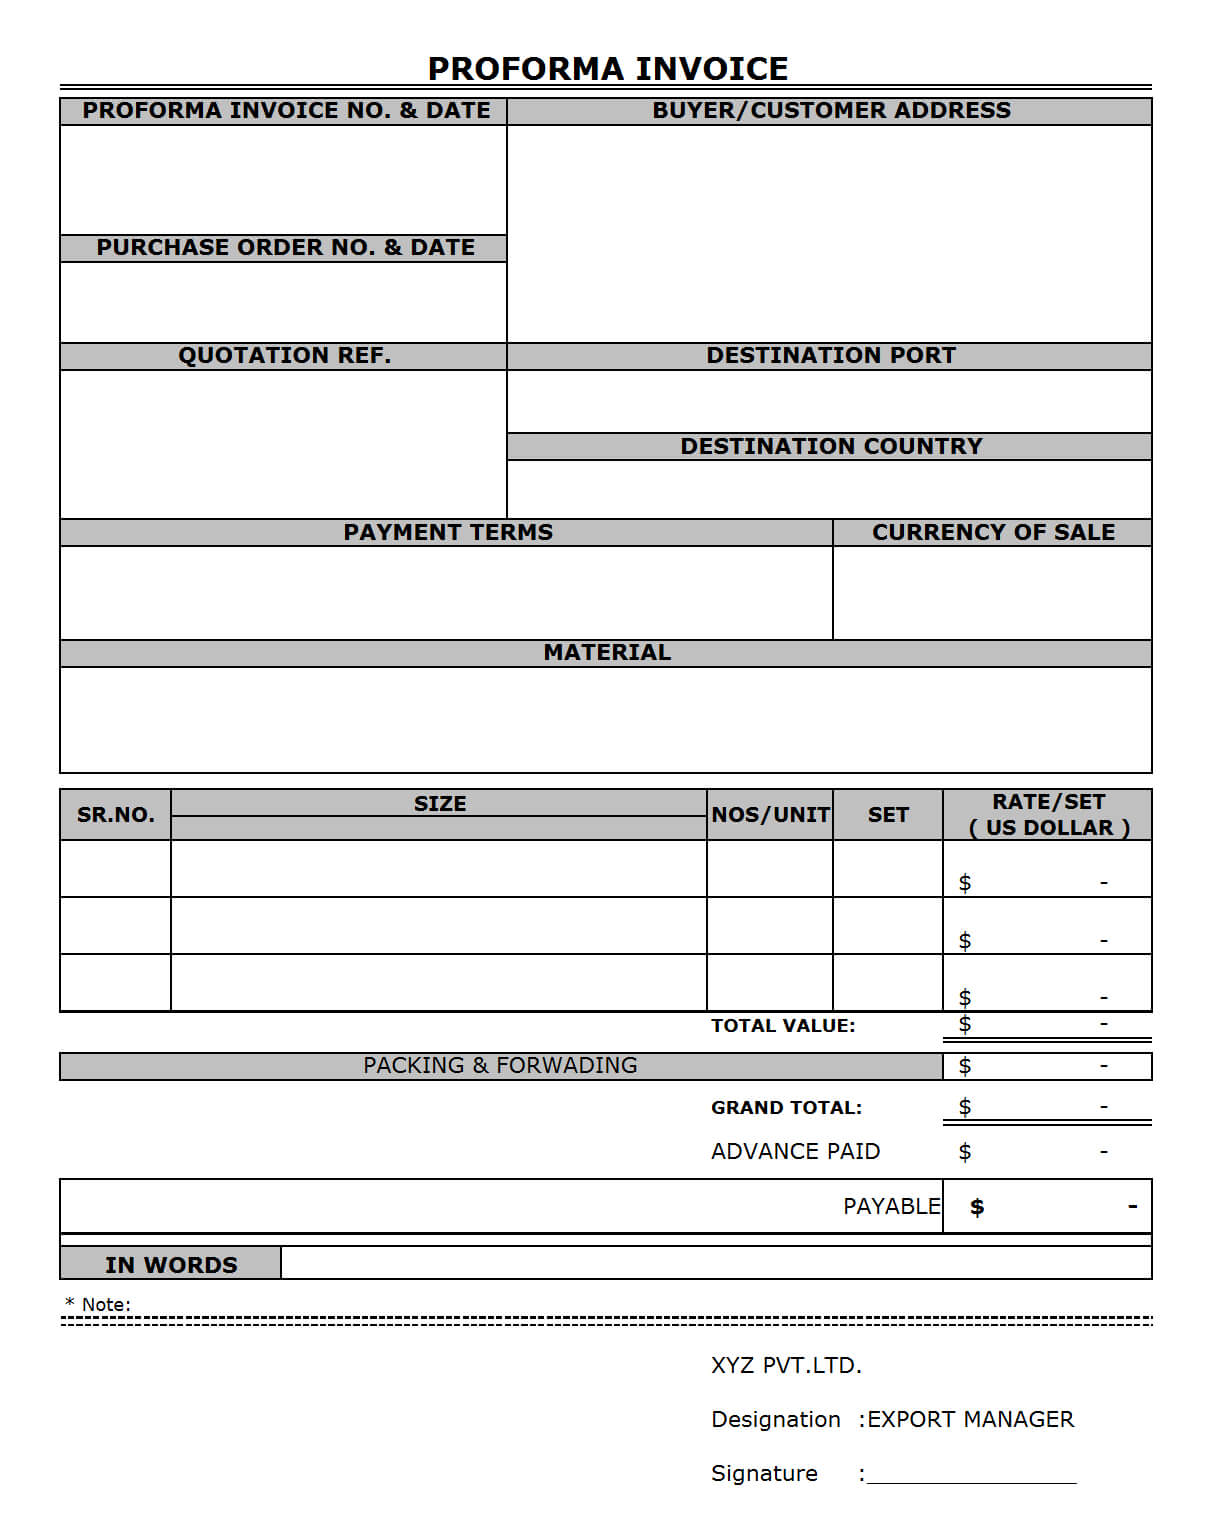 Proforma Invoice Format Format | Word | Pdf | Report Intended For Free Proforma Invoice Template Word